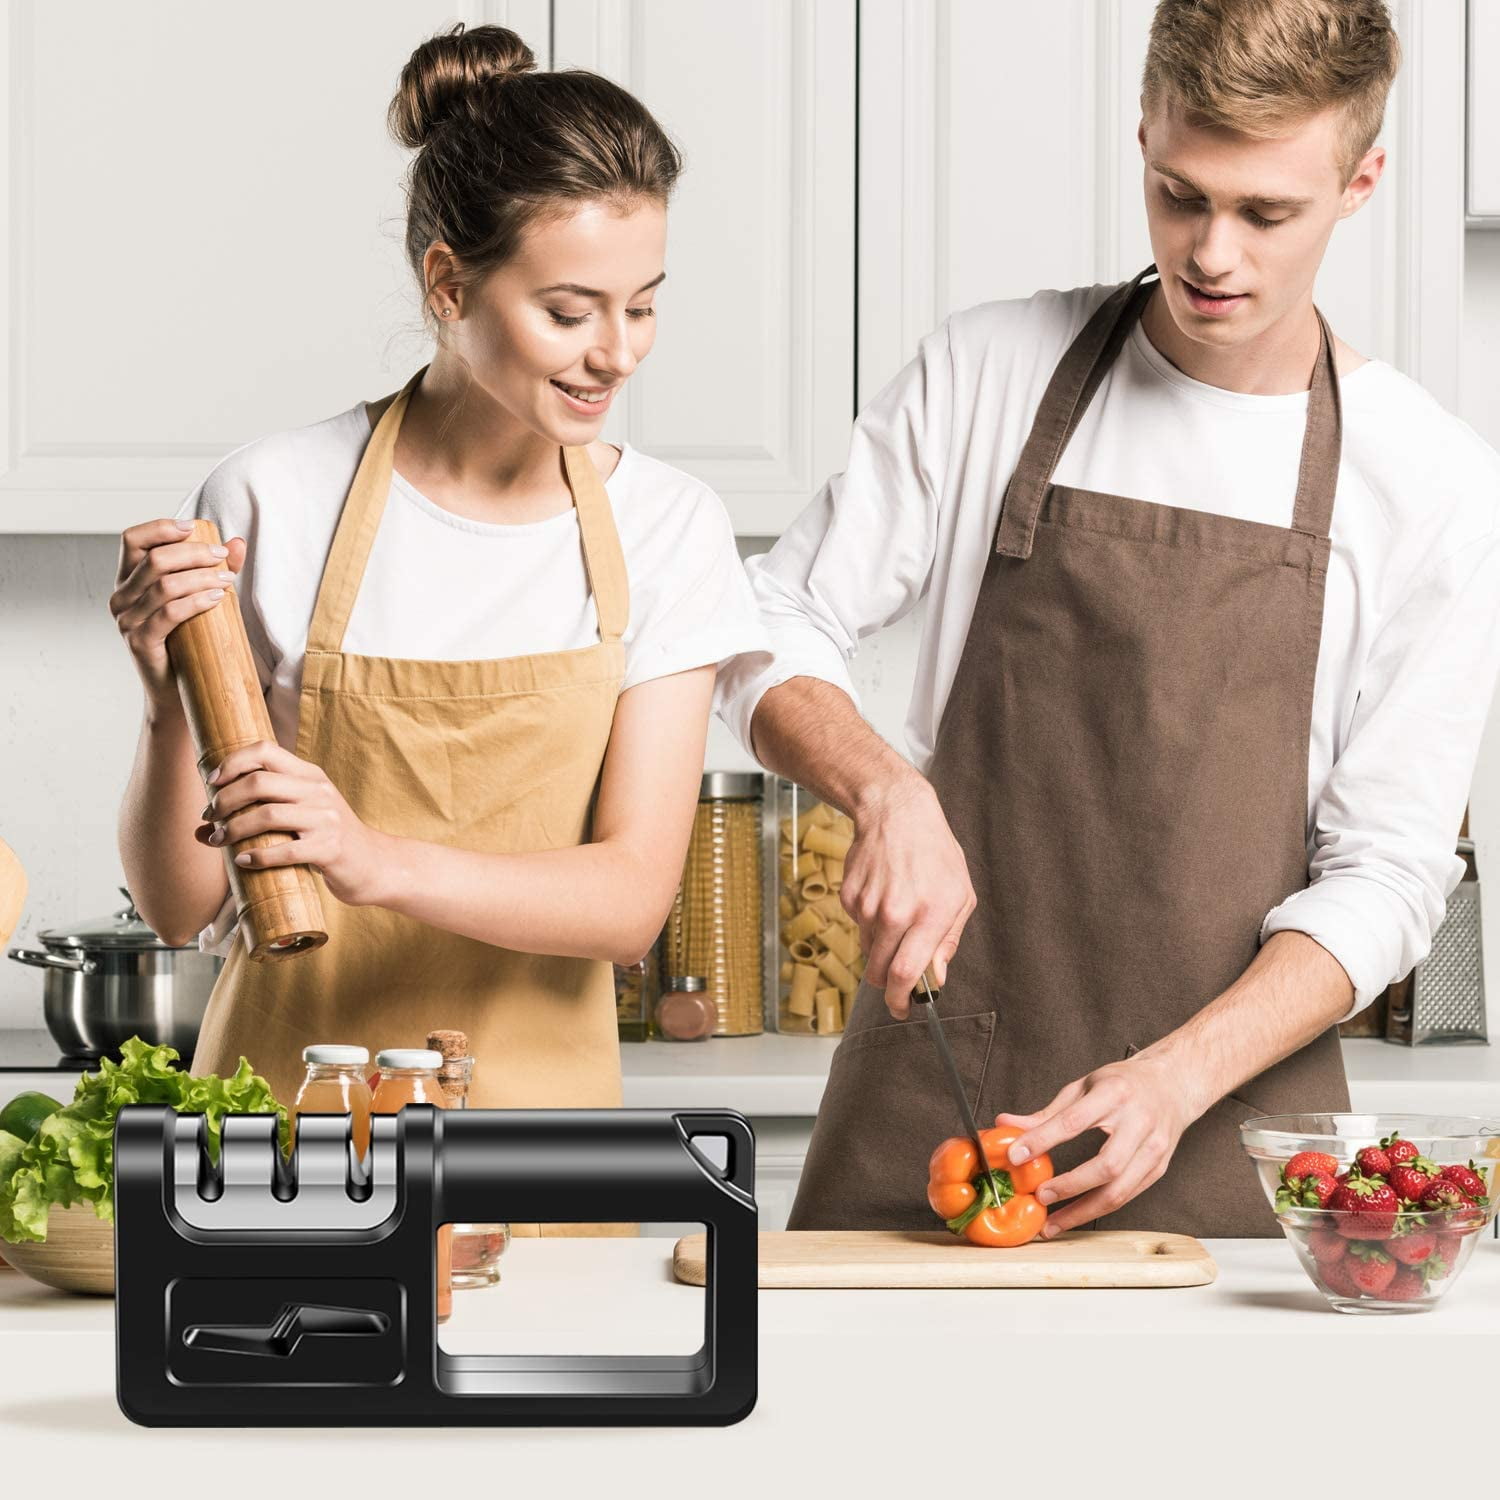 QCKJ Knife Sharpeners for Kitchen Knives, Scissor Sharpener 4 in1 Can Help  Quickly and Safely Repair, Restore, And Polish Blunt, With Hanging Ringanti